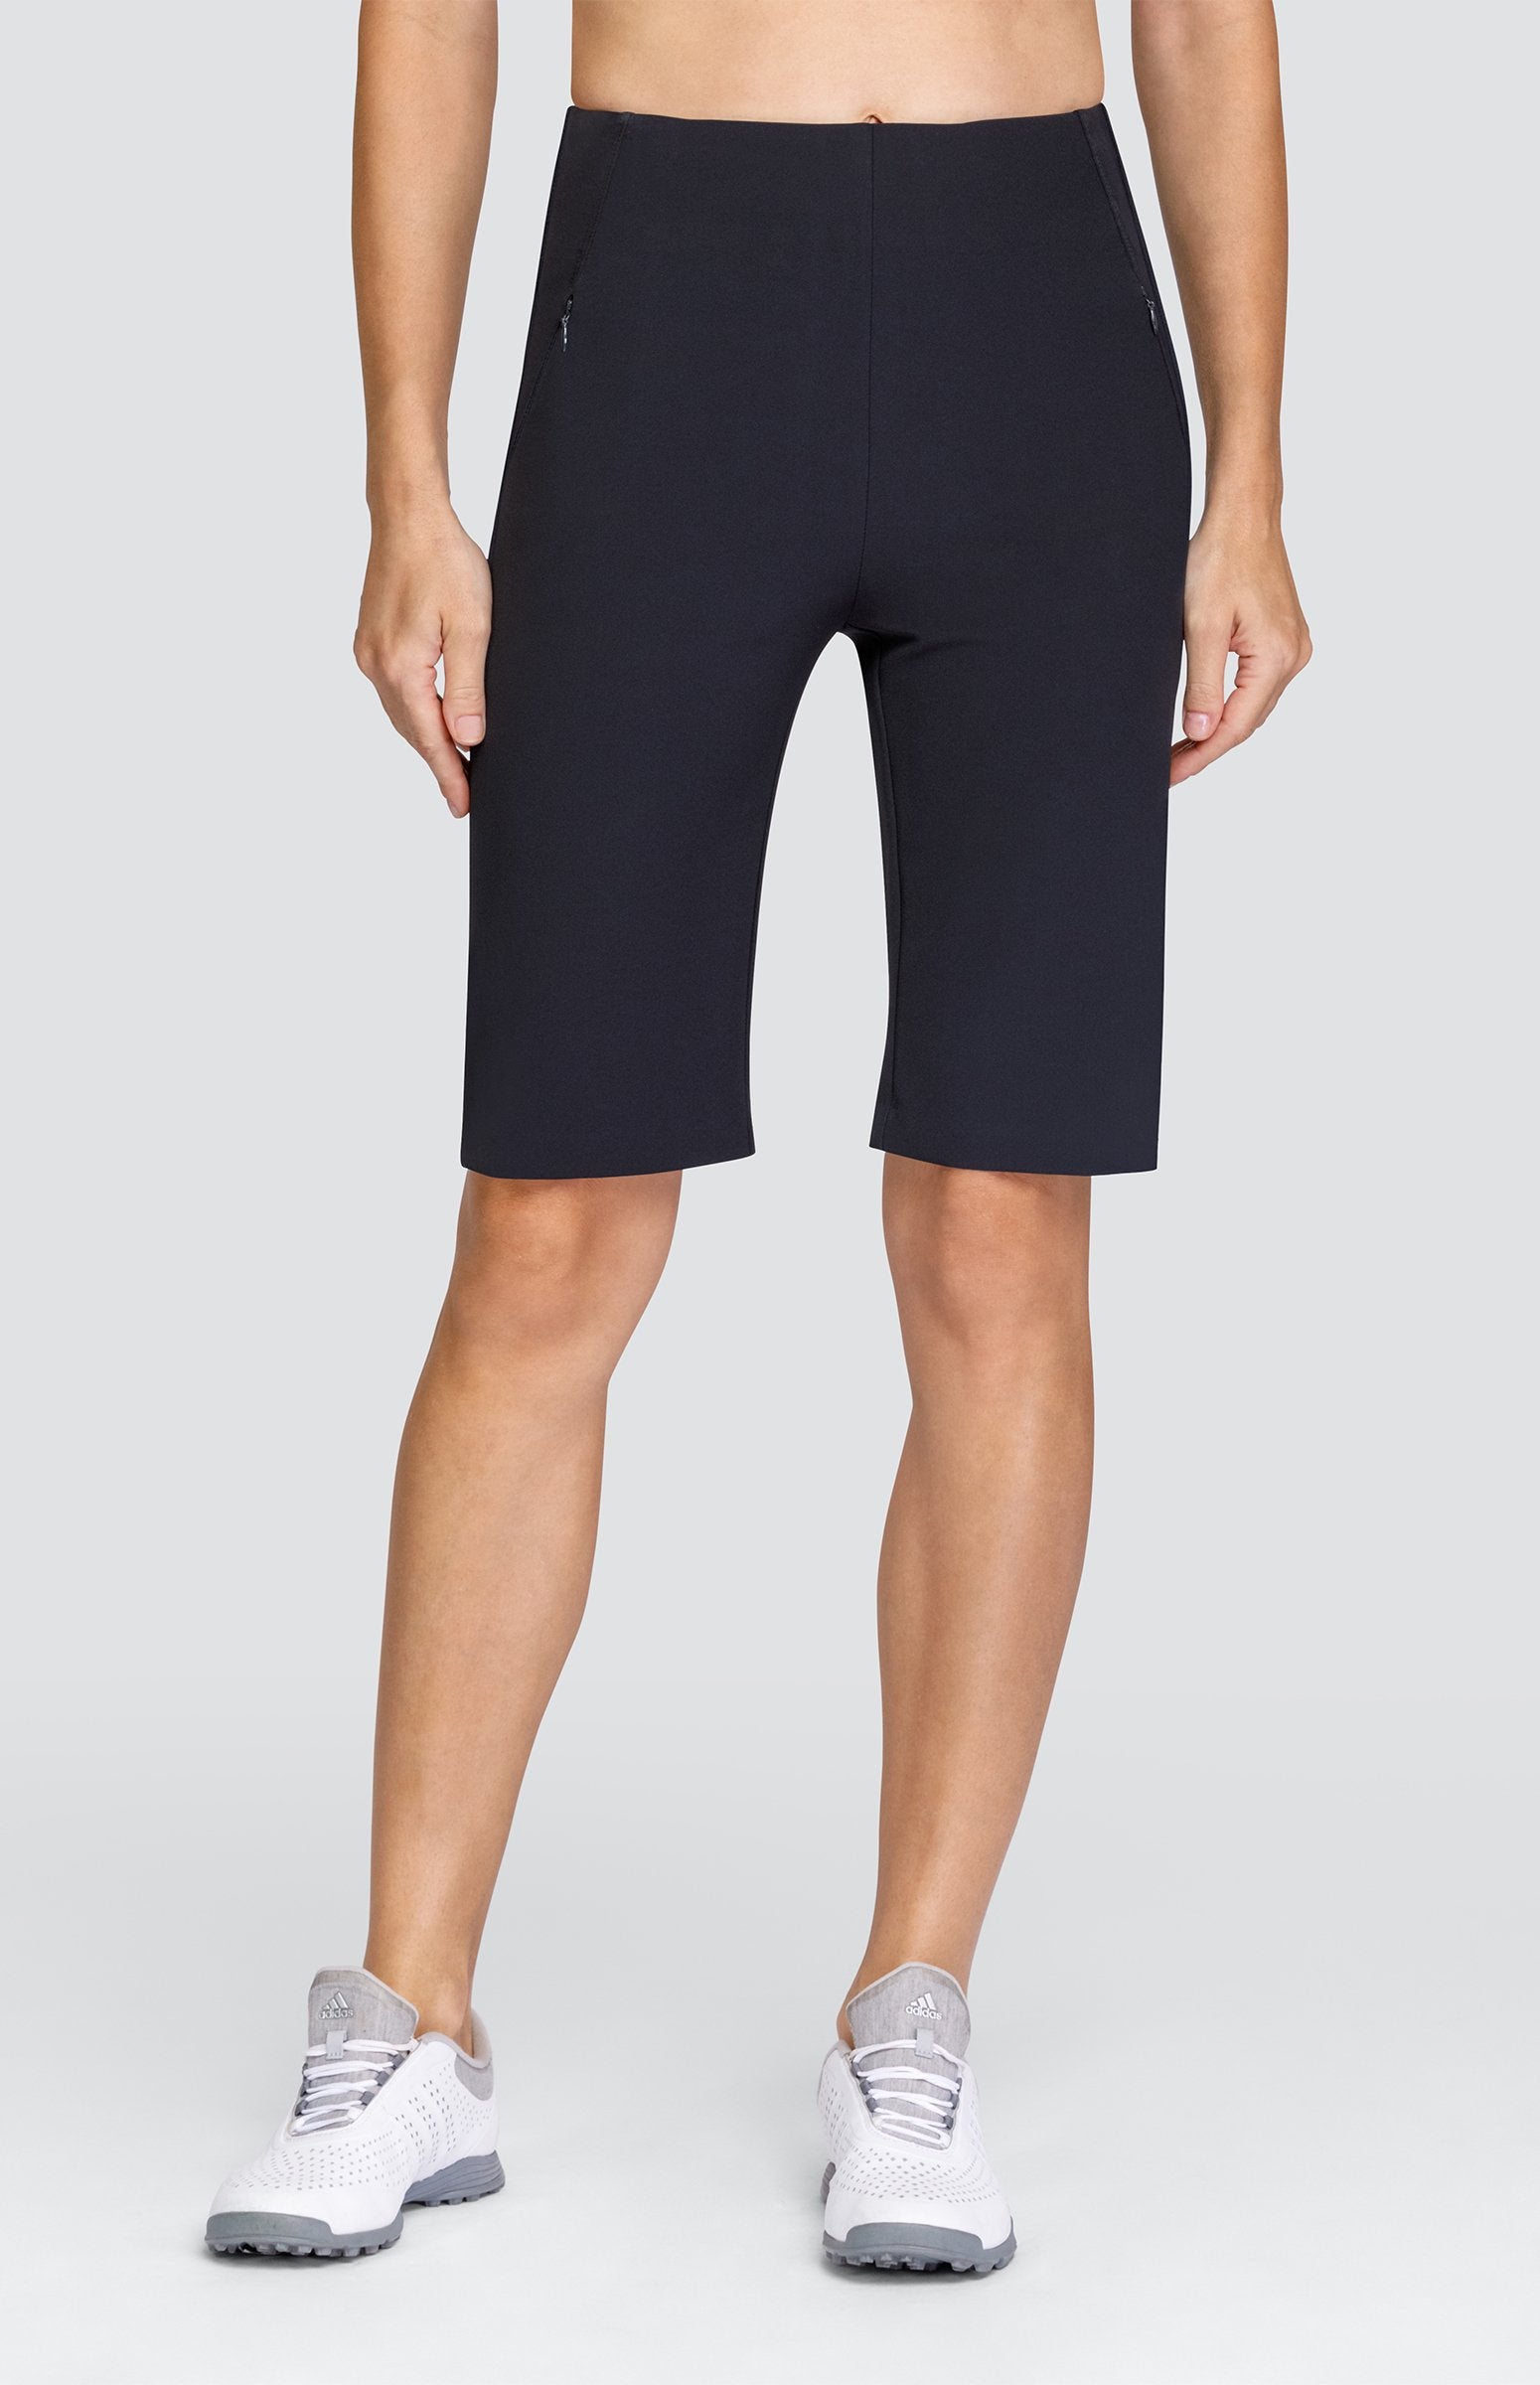 Tail Activewear Allure Pull On Lightweight Shorts-Black, White, and Na